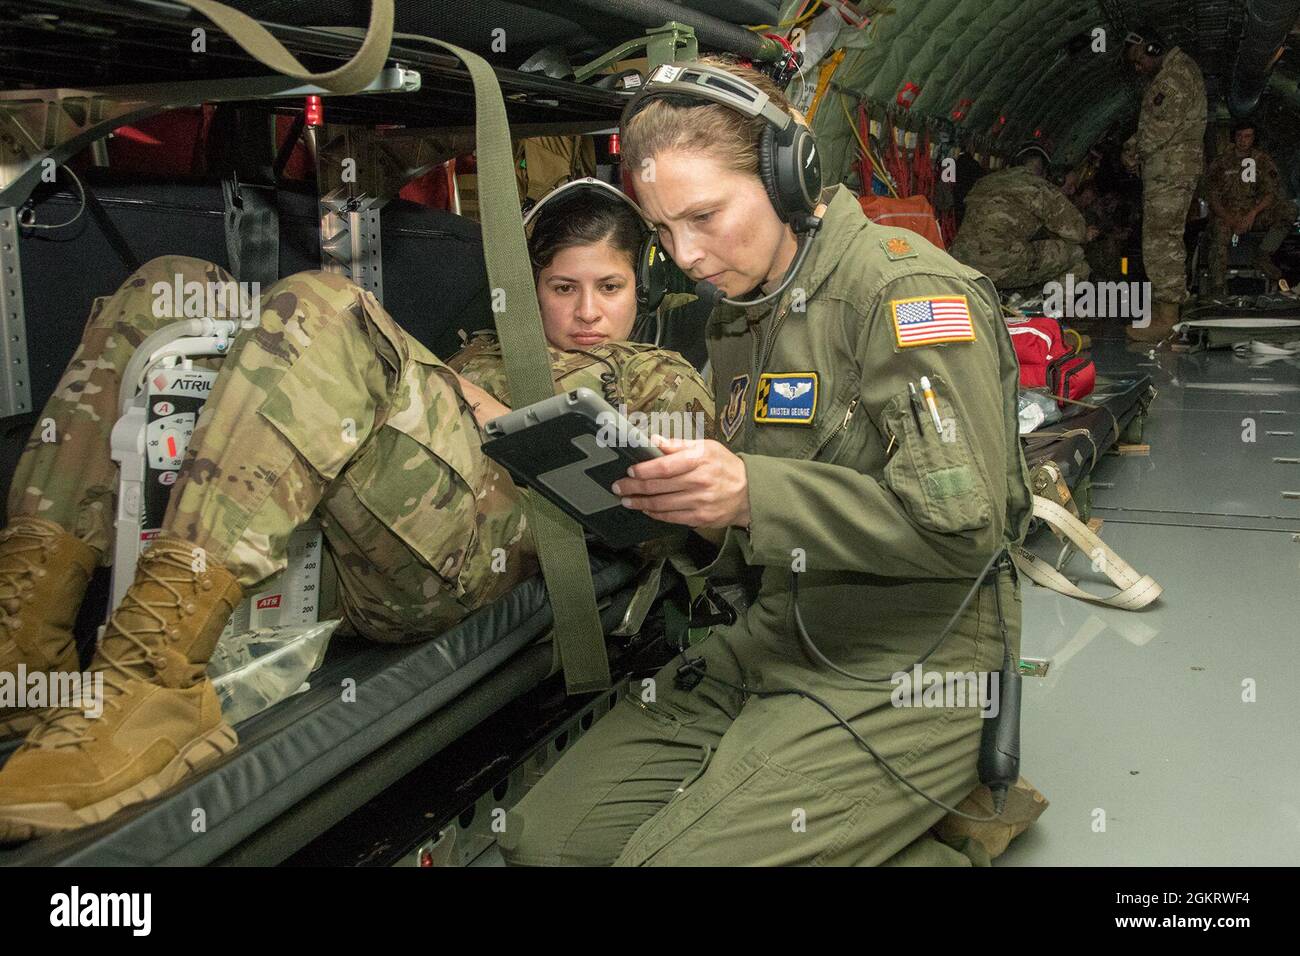 U.S. Air Force Major Kristen George, 459th Aeromedical Evacuation Squadron flight nurse, conducts a patient assessment on 2nd Lt. Rosa kirk, AES flight nurse, during a simulated inn-flight training mission between the 459th AES and 315th AES based out of Charleston, South Carolina. Stock Photo